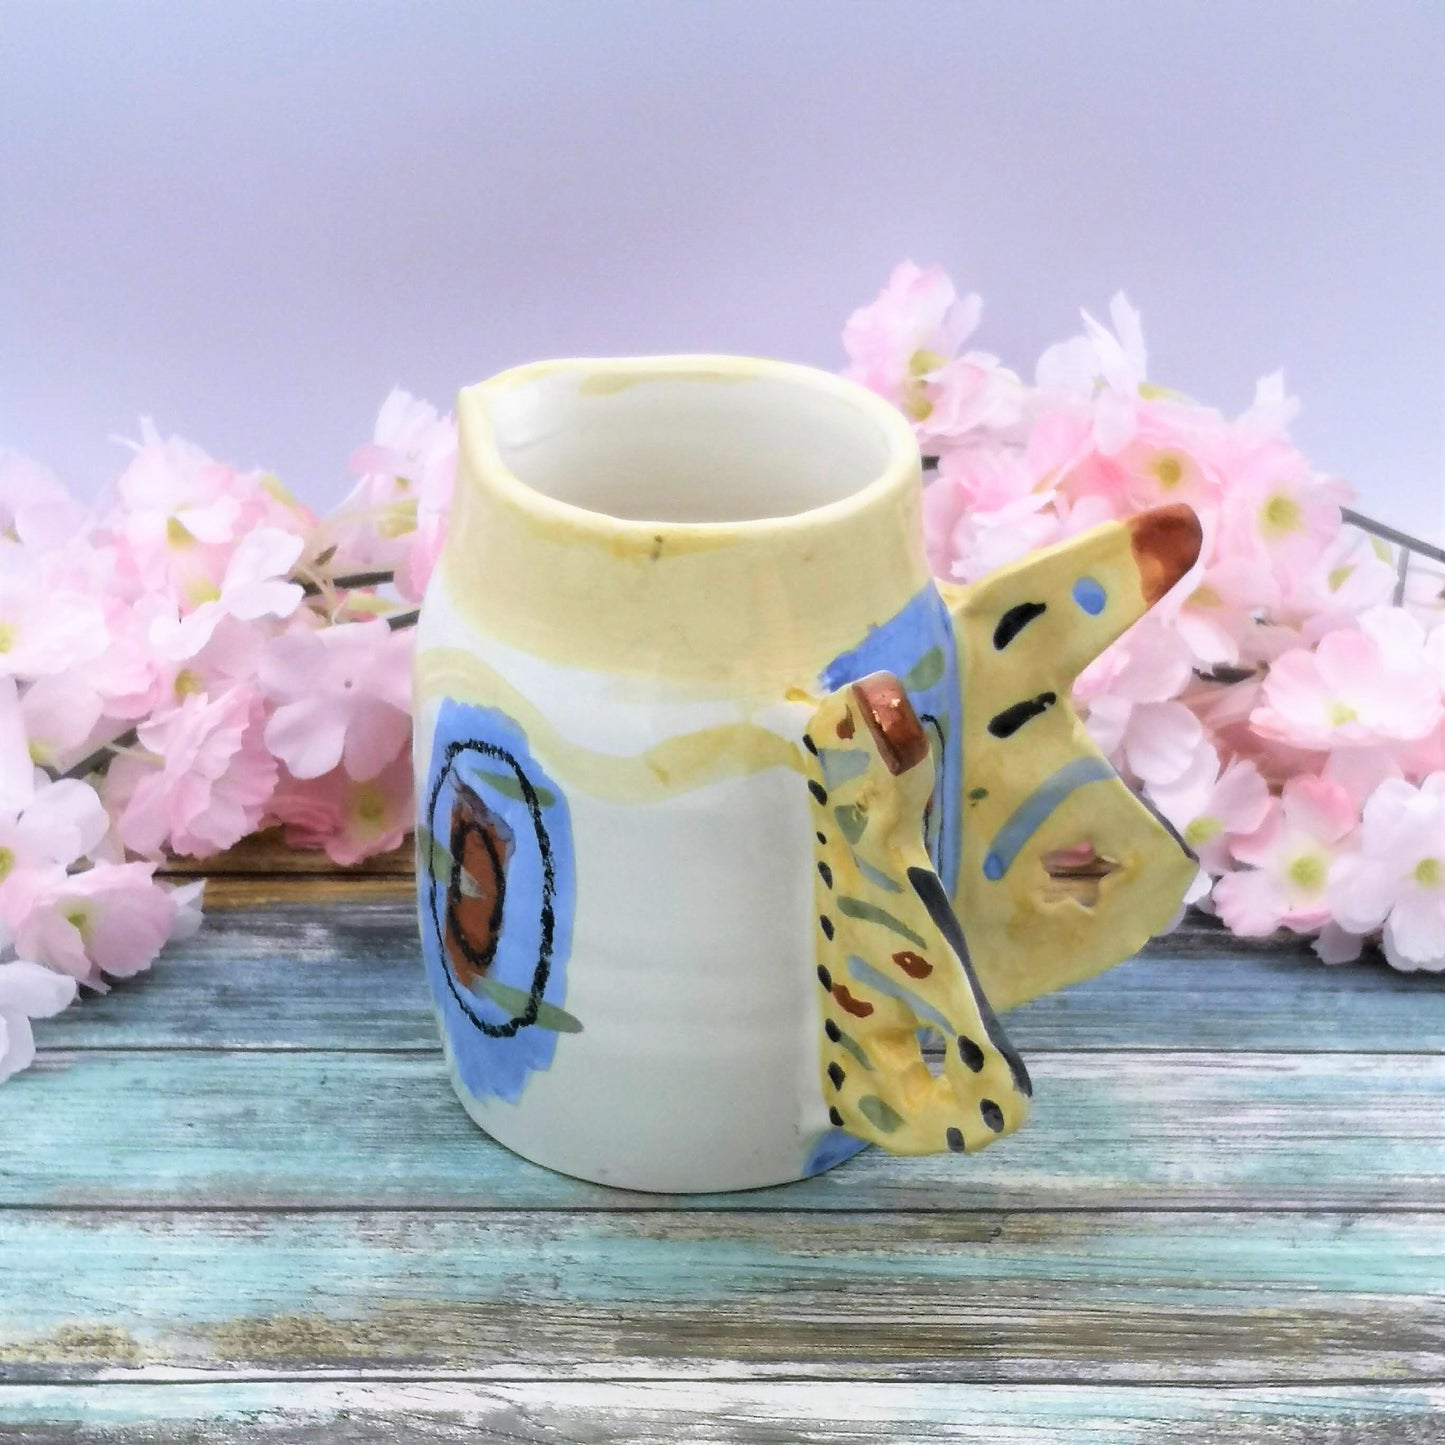 HAND PAINTED PITCHER, Ceramic Vase, Mothers Day Gift From Daughter, Handmade Pottery Vase, Ceramic Water Pitcher, Best Sellers Host Gift - Ceramica Ana Rafael